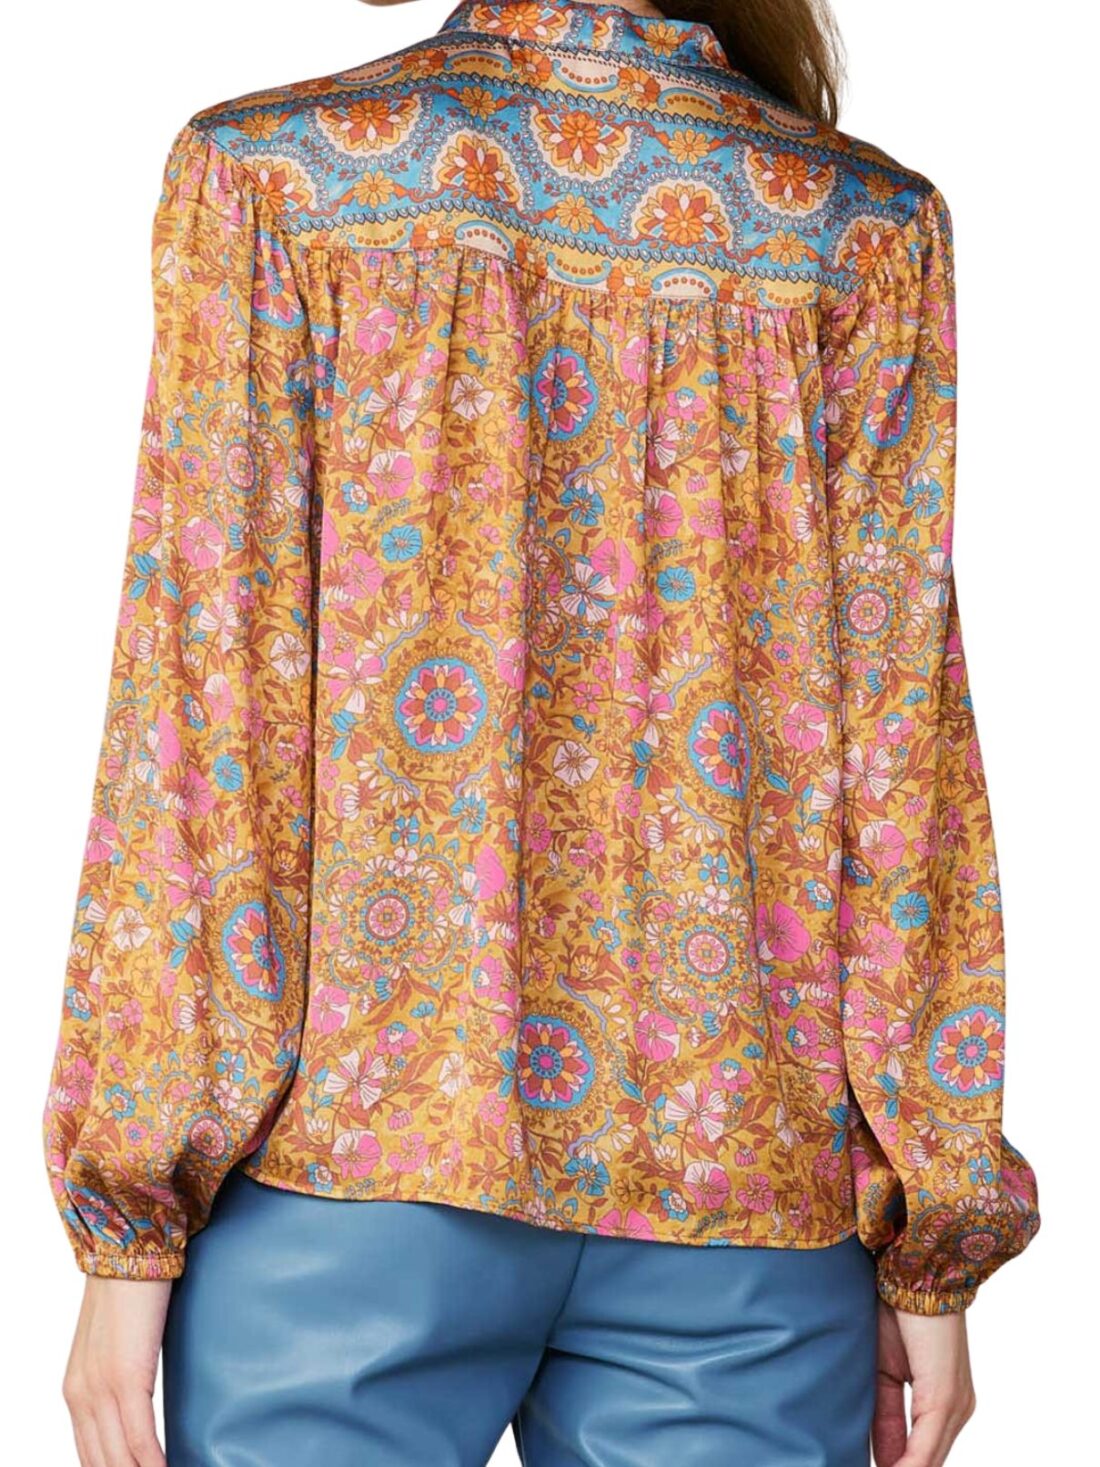 current air l/s silkie balloon sleeve top in marmalade multi